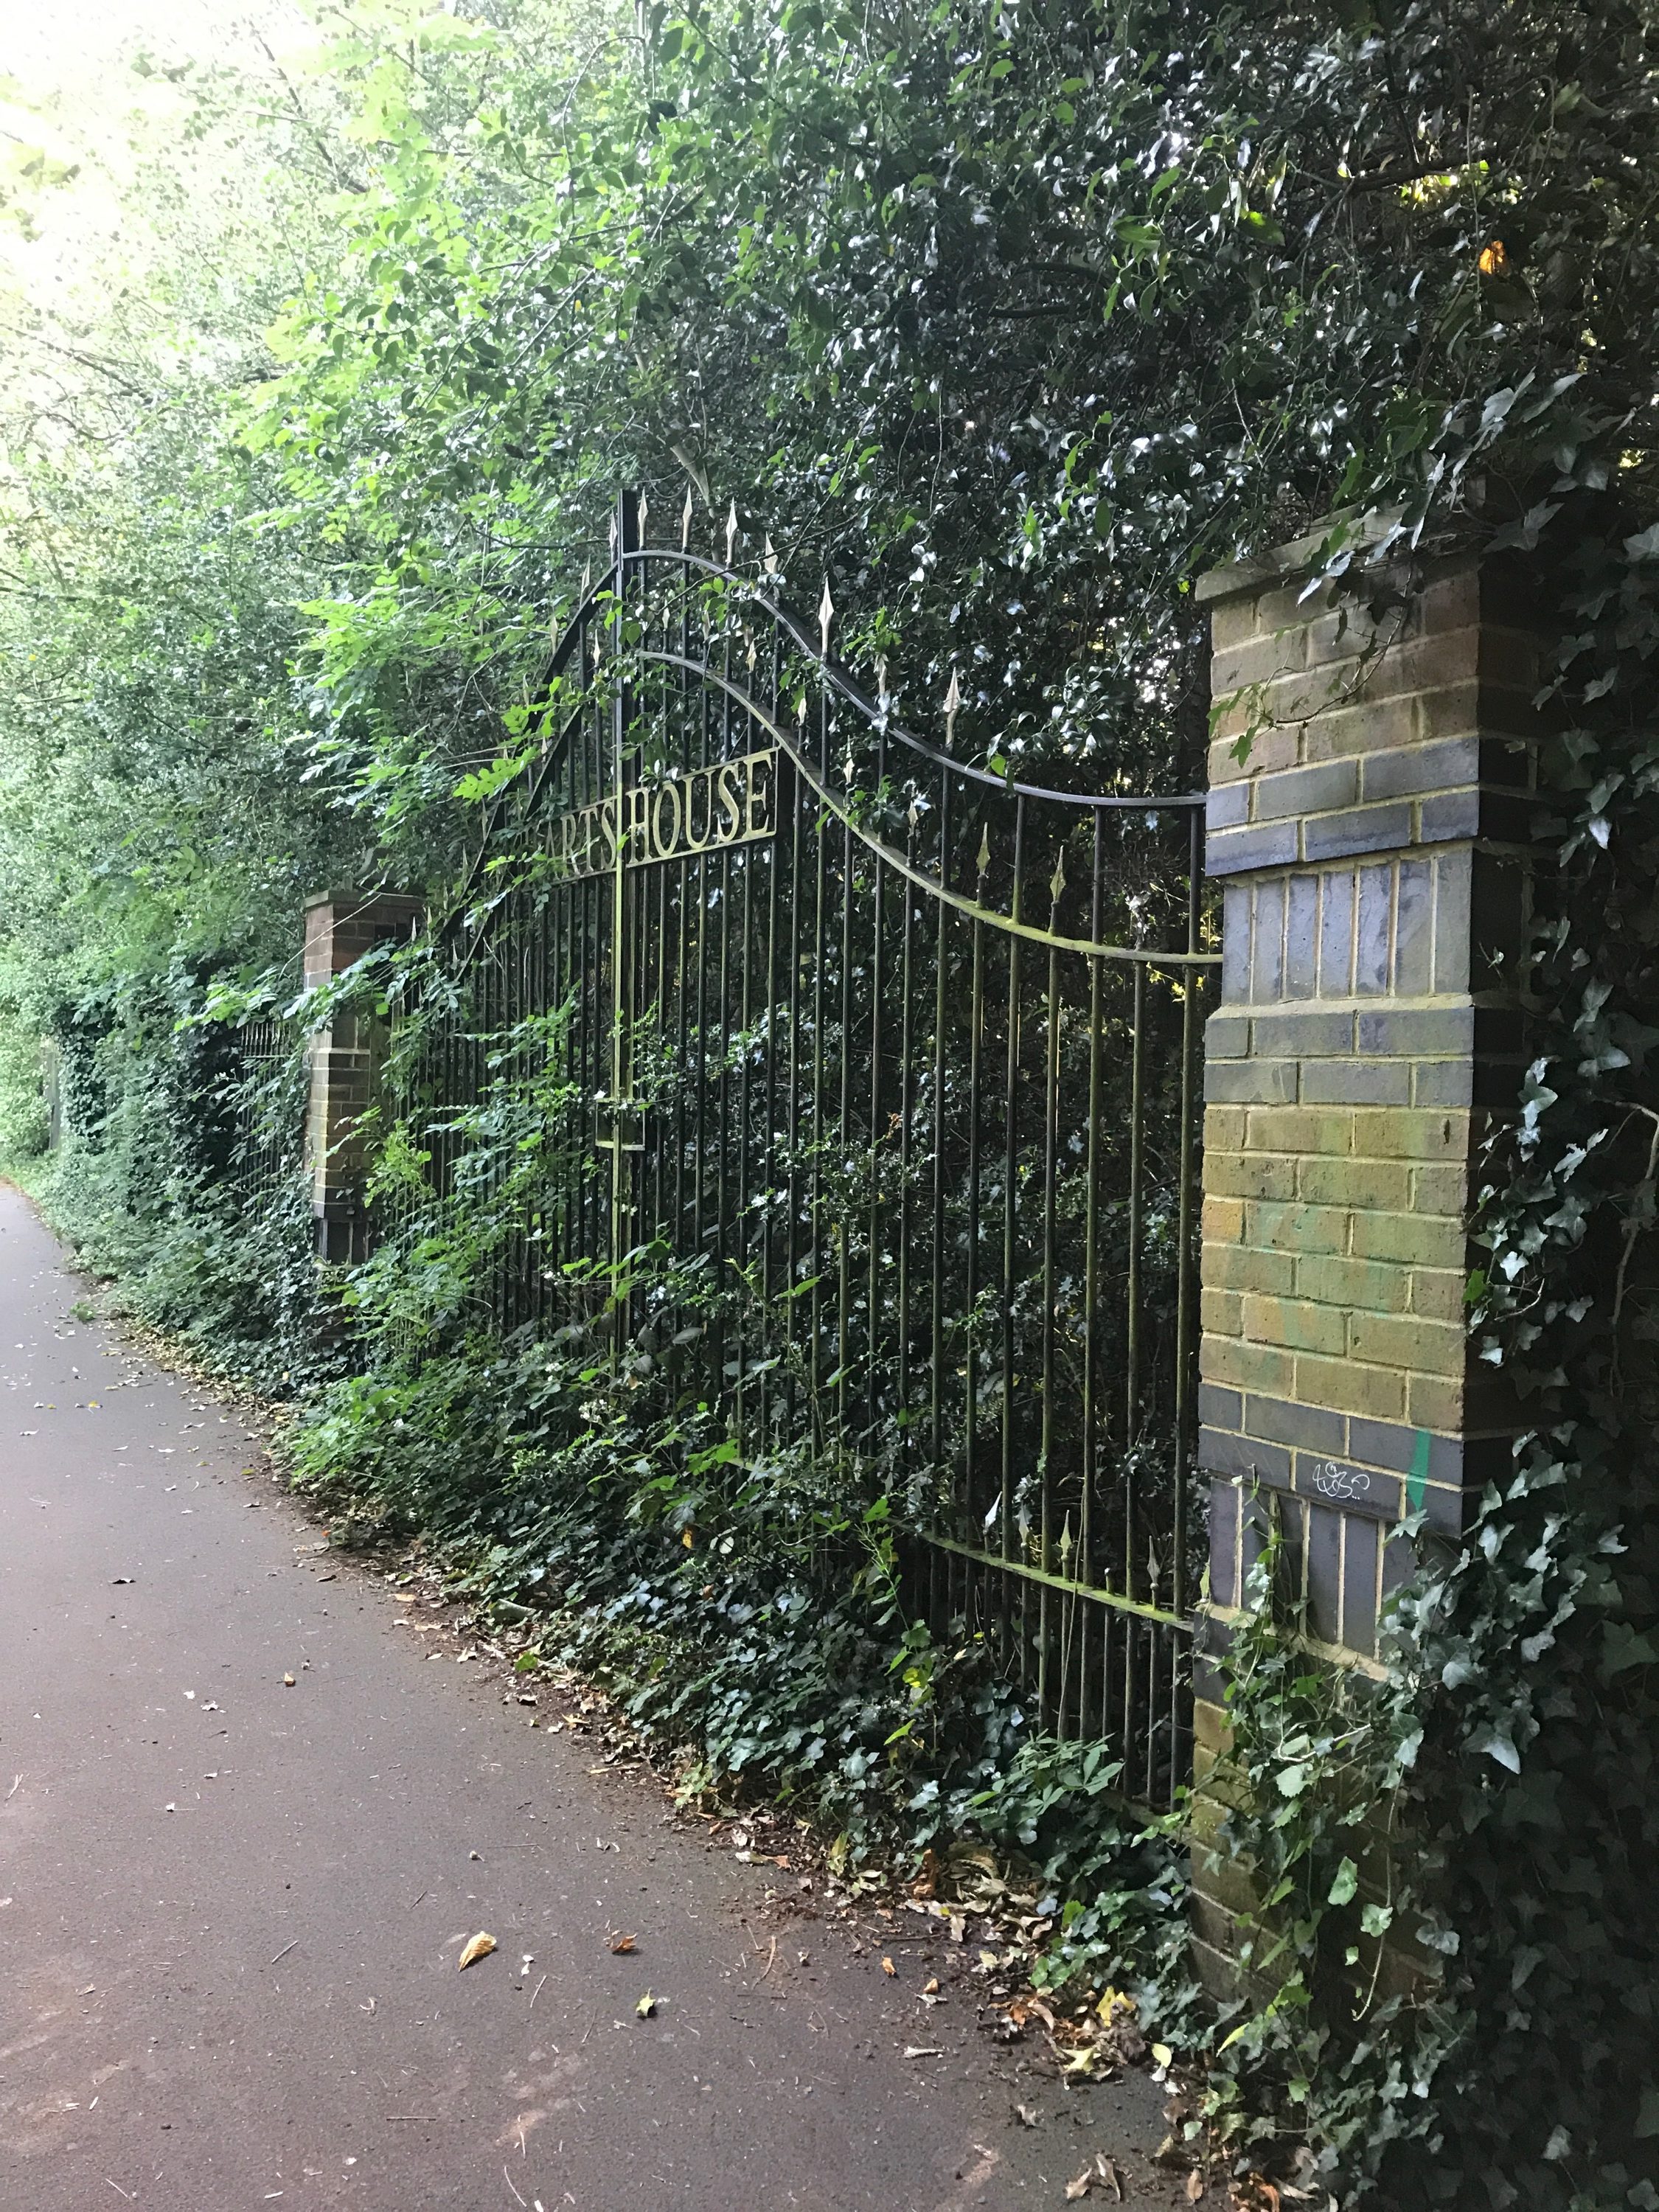 Iron gate covered in ivy preventing it from being open